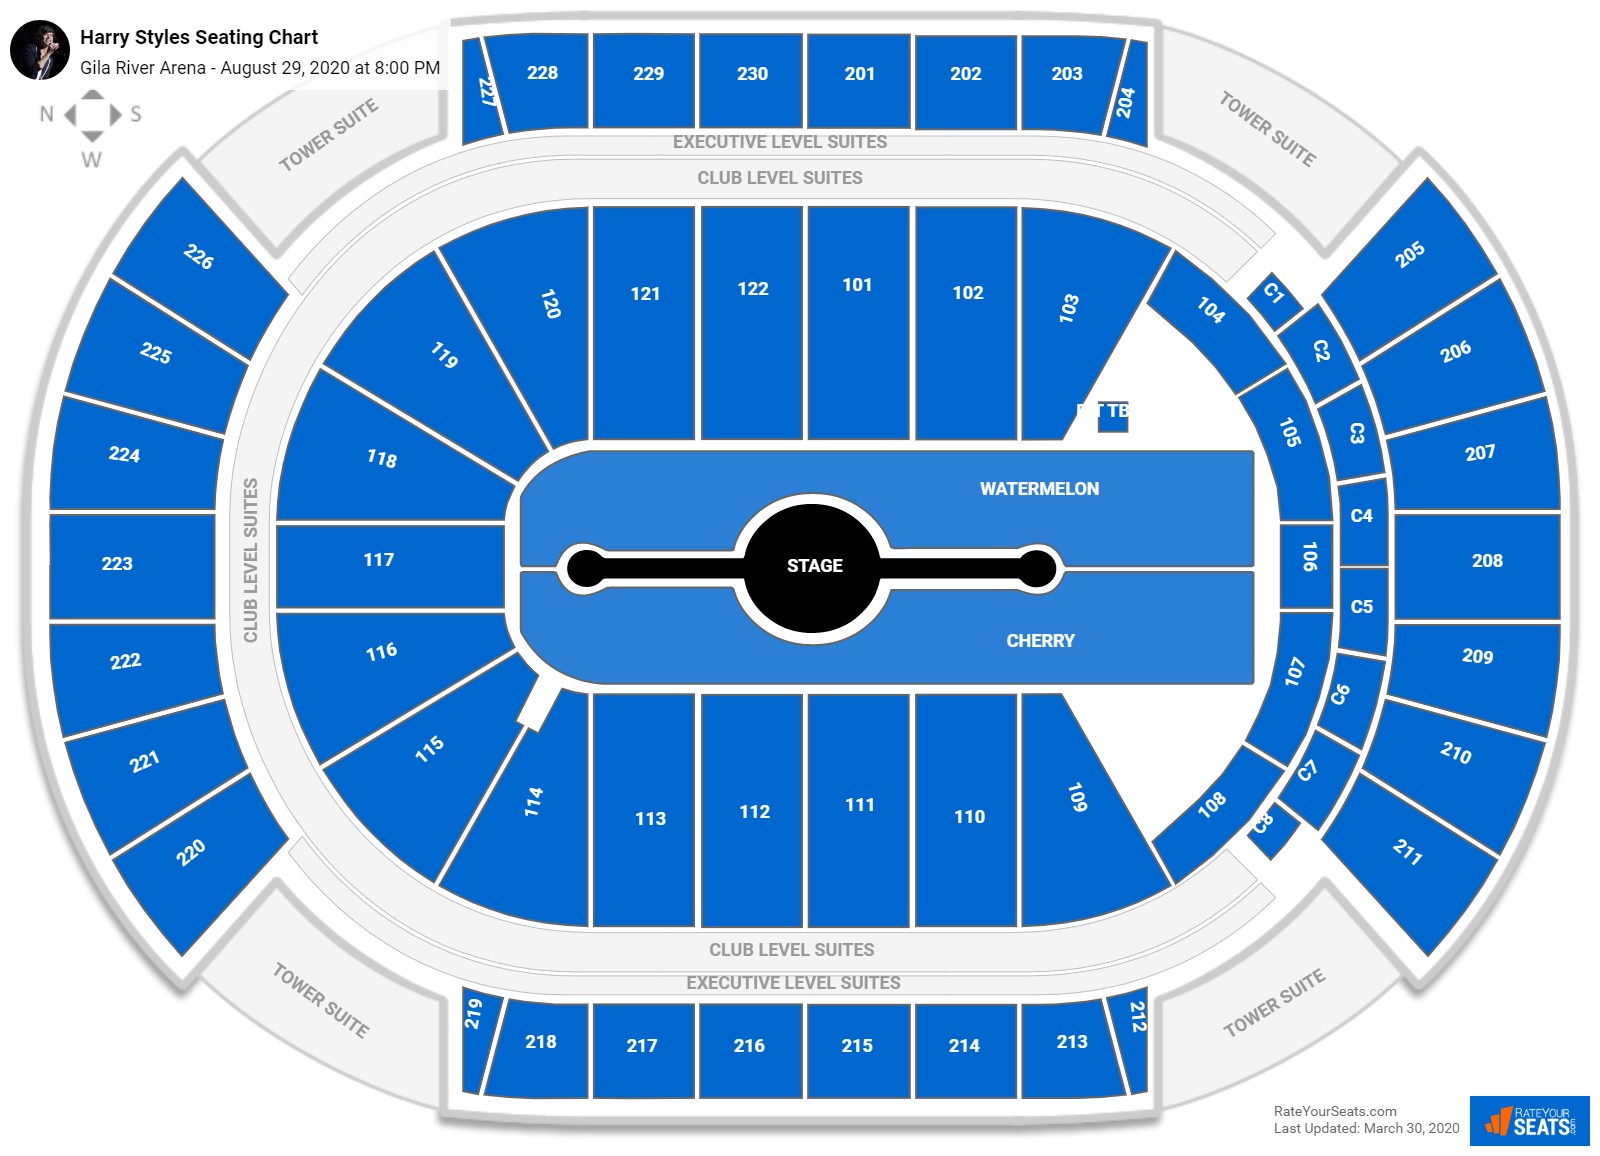 Gila River Arena Seating Charts for Concerts